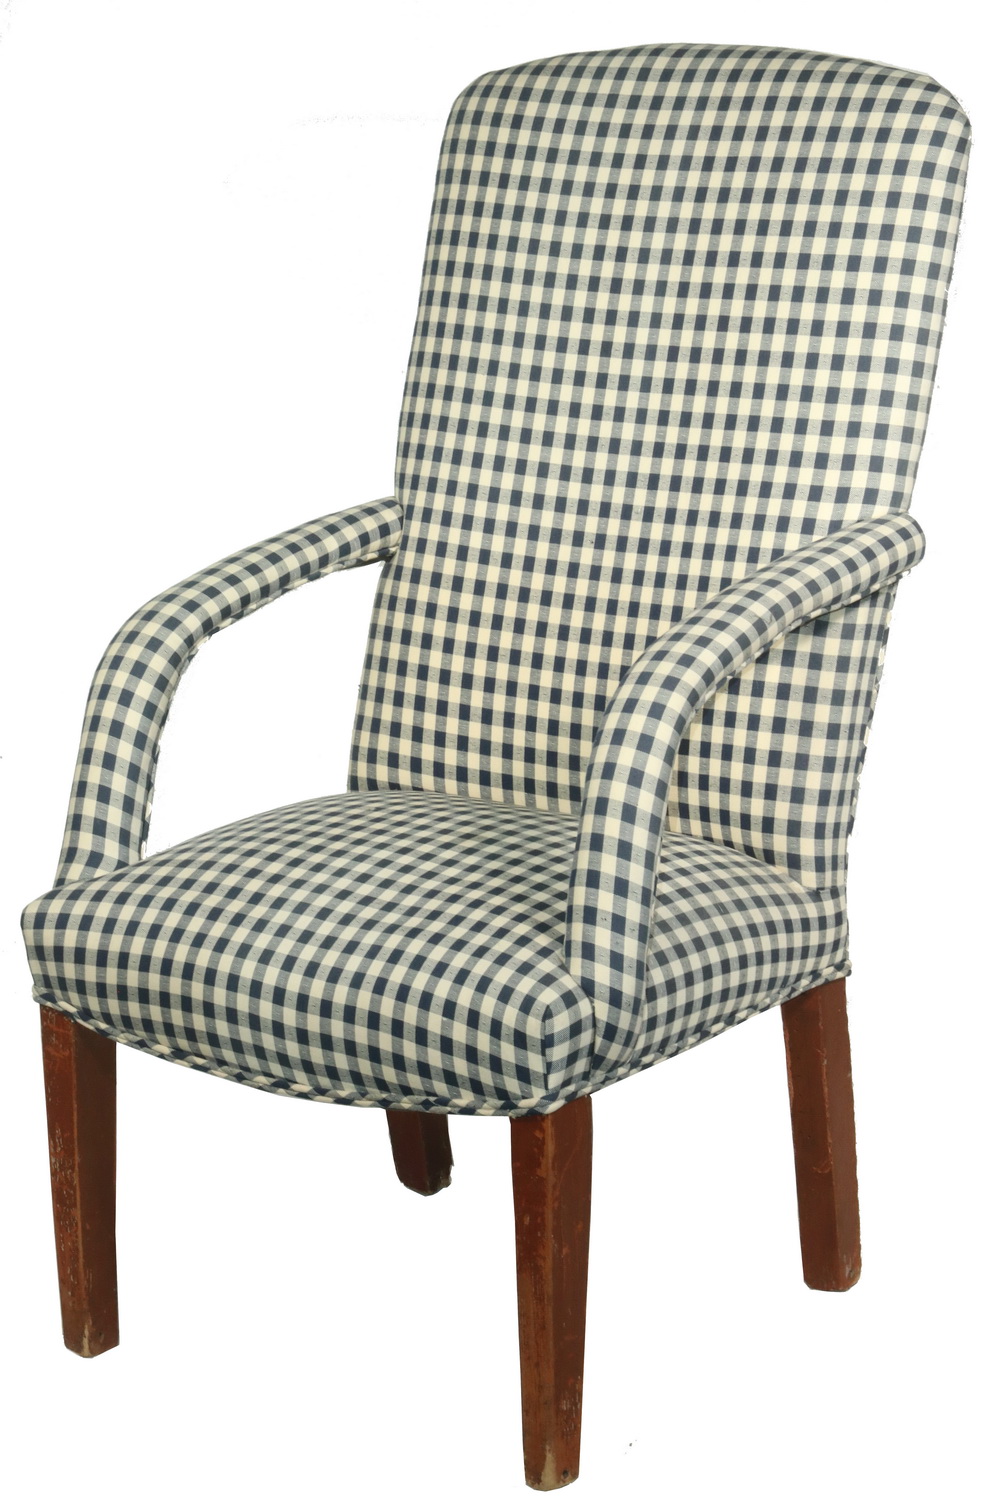 UPHOLSTERED COUNTRY ARMCHAIR 19th 2b50ea